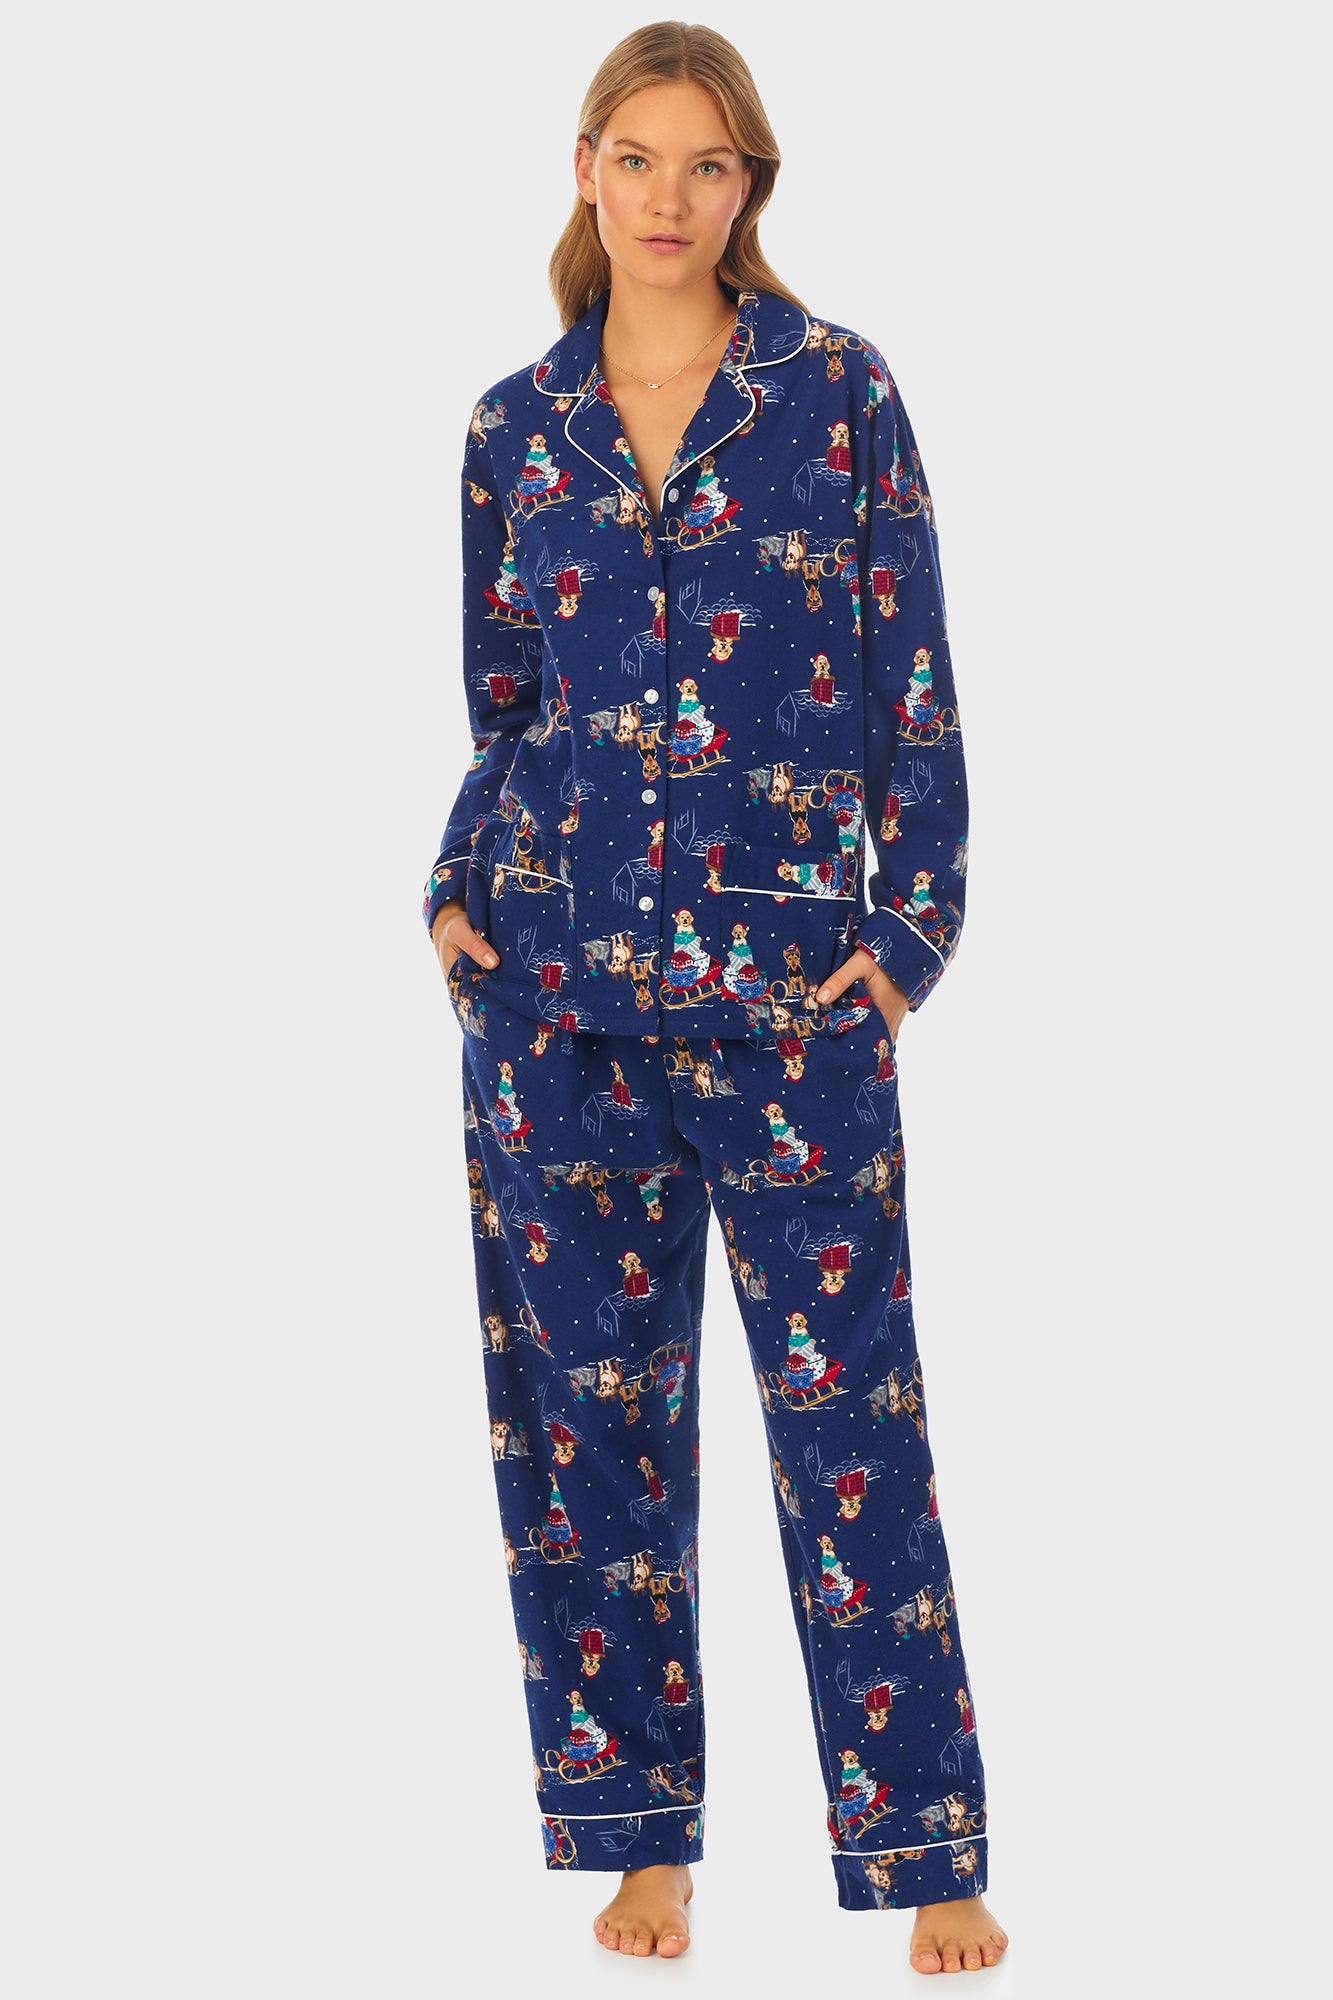 A lady wearing navy long sleeve women's pajama with sleigh puppies print.